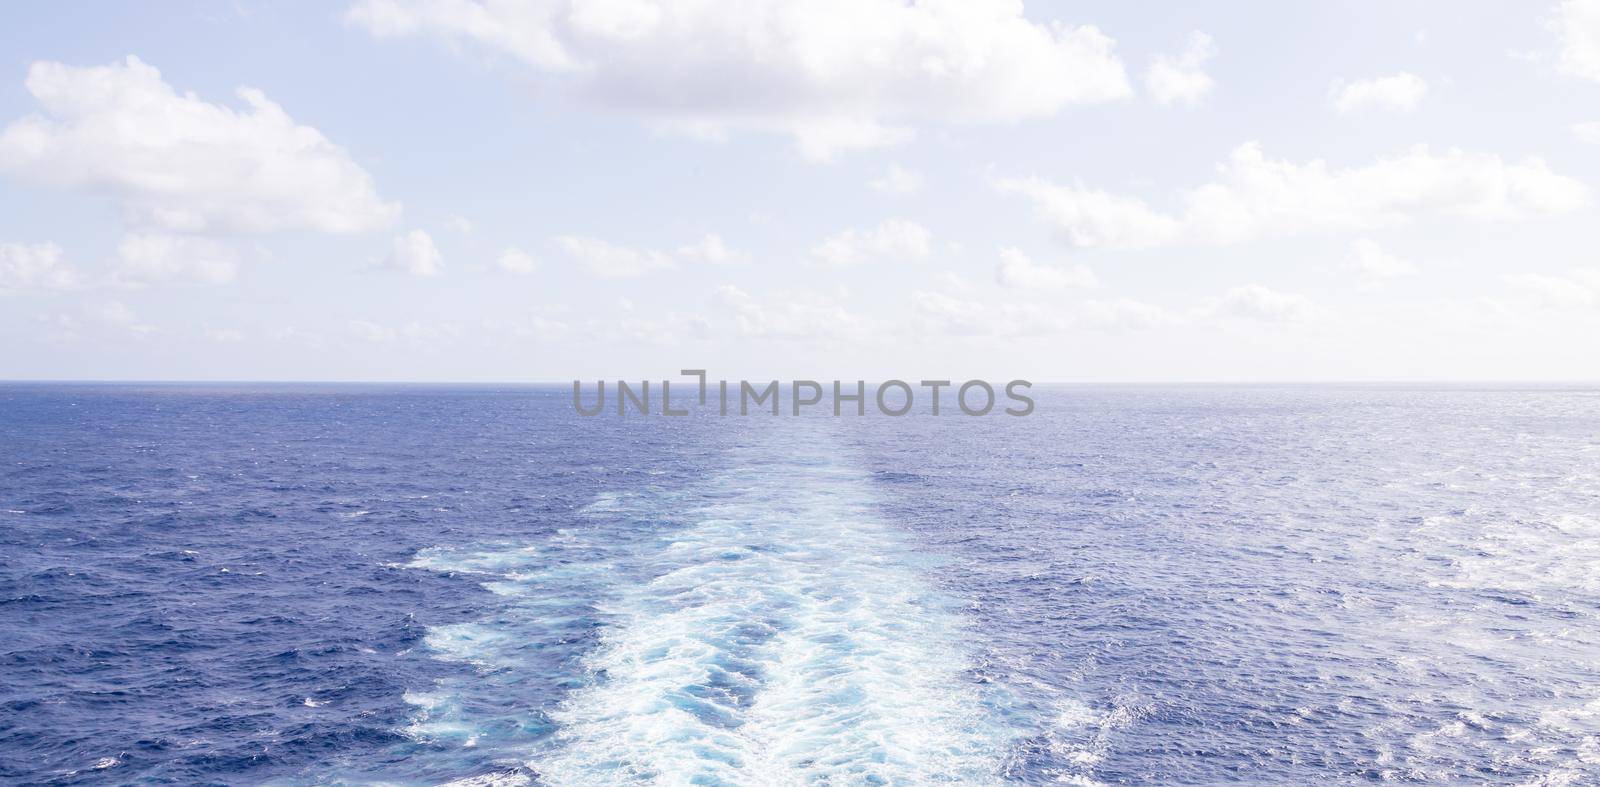 Cruise ship wake or trail on ocean surface by Mariakray